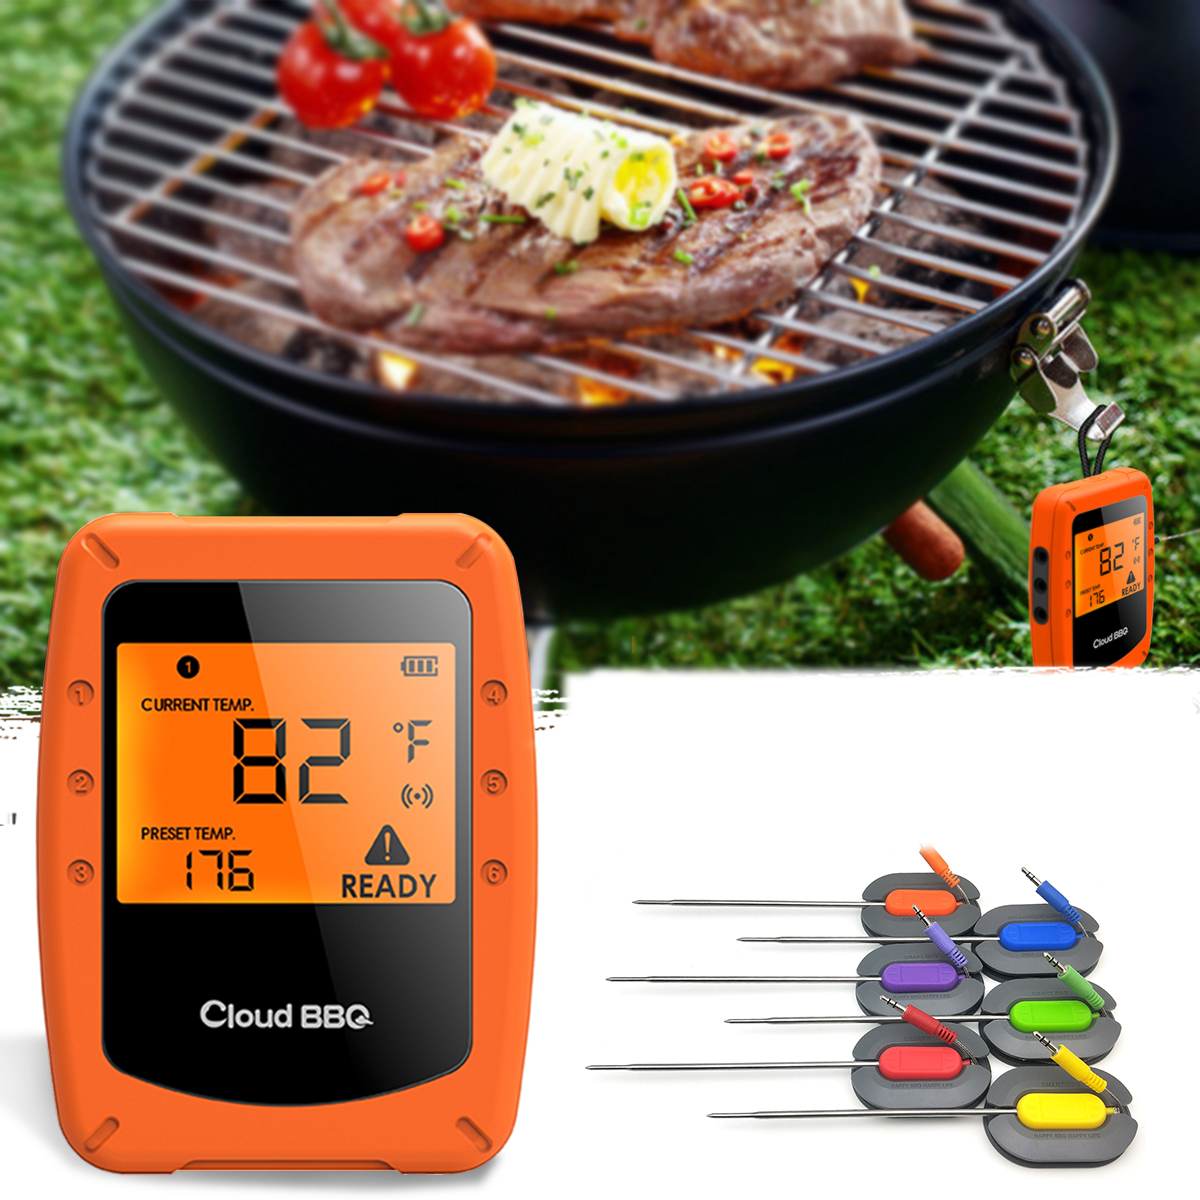 

6 Probes Wireless Smart BBQ Thermometer Oven Meat Food bluetooth Wifi For IOS Android